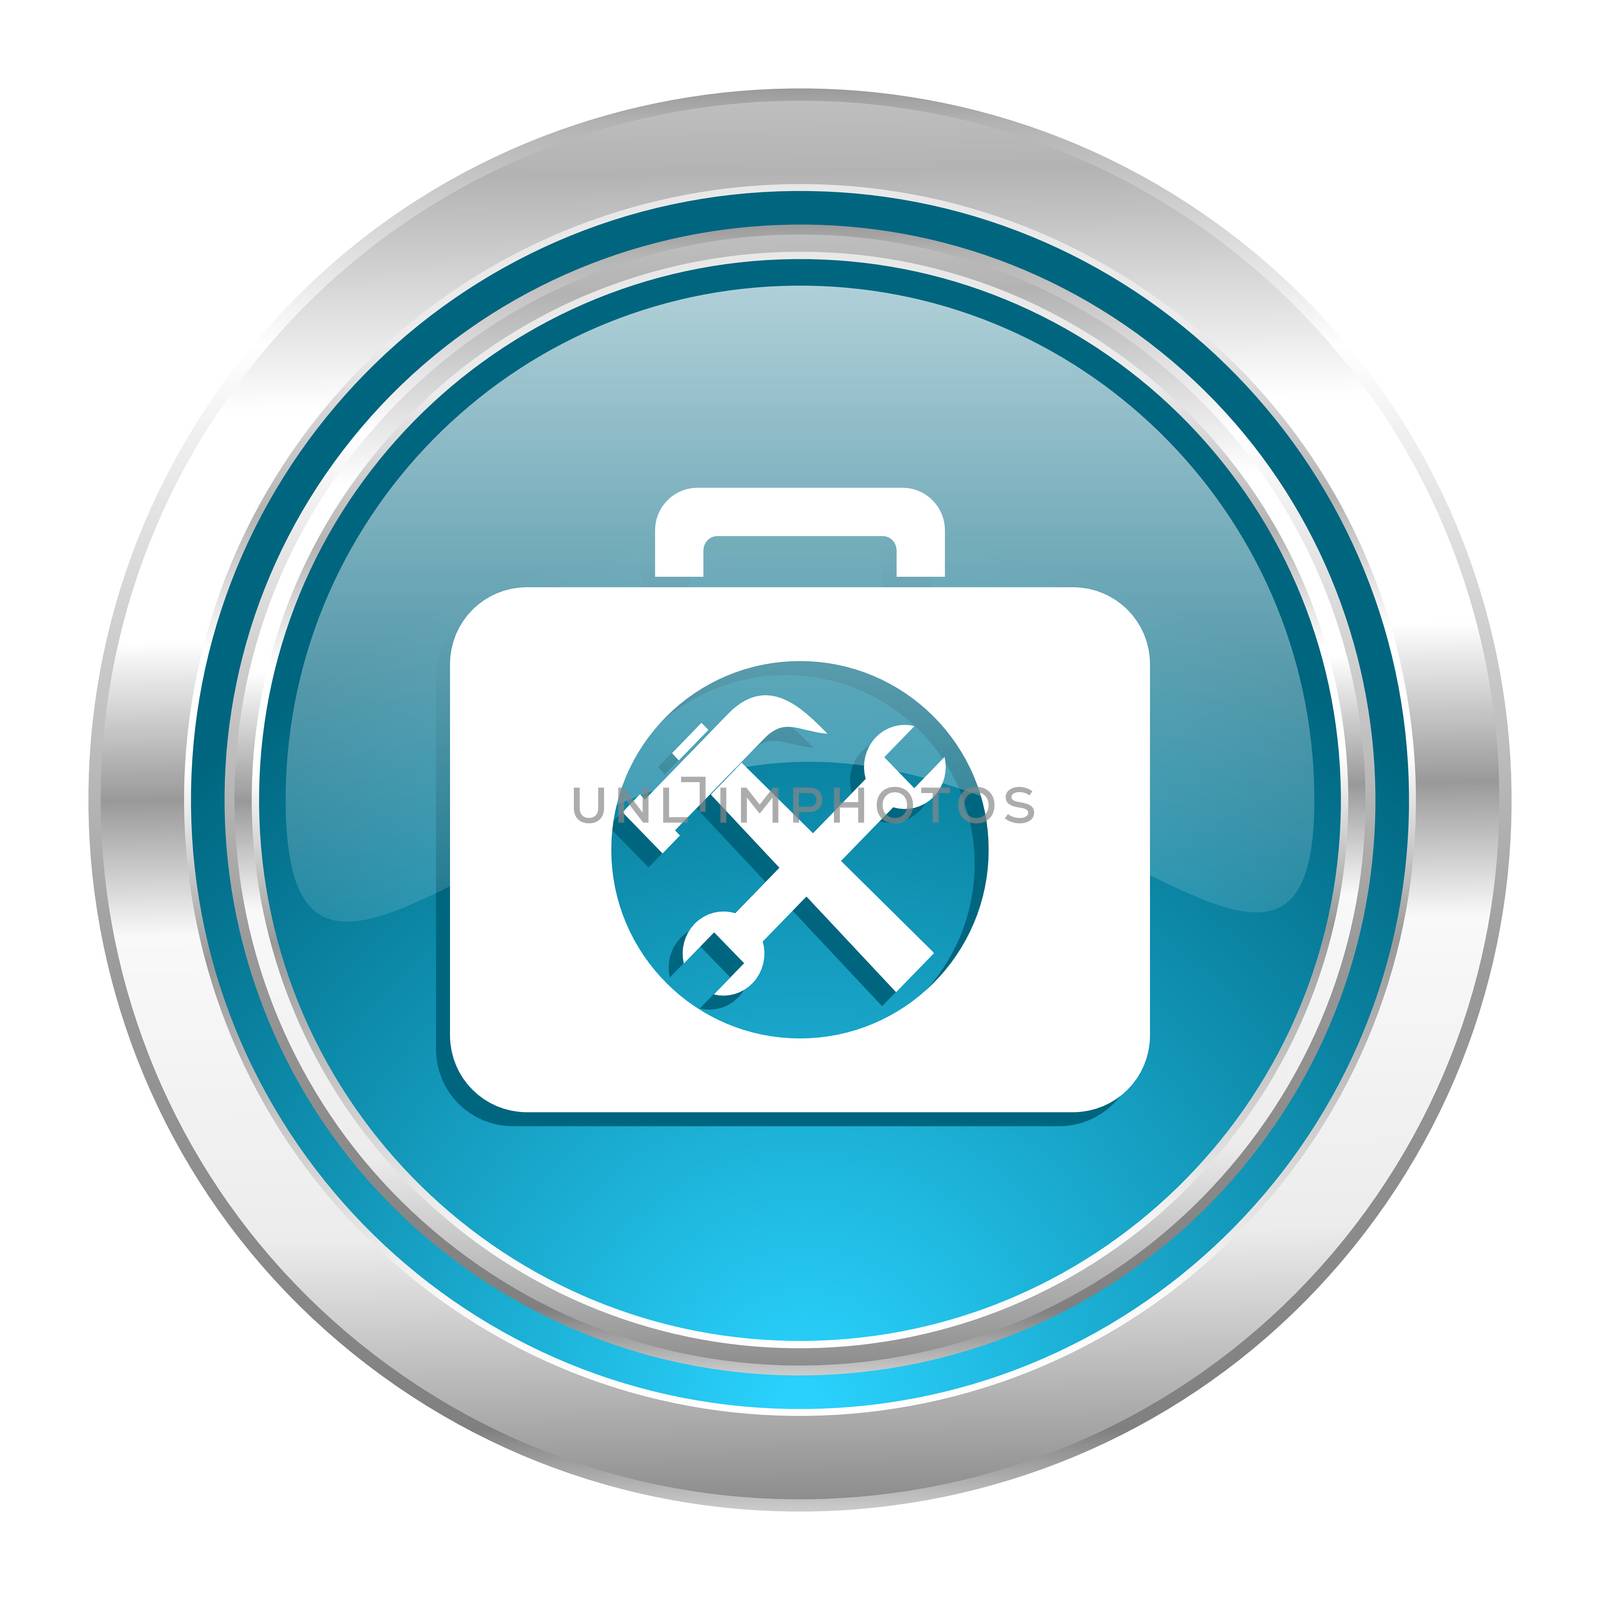 toolkit icon, service sign